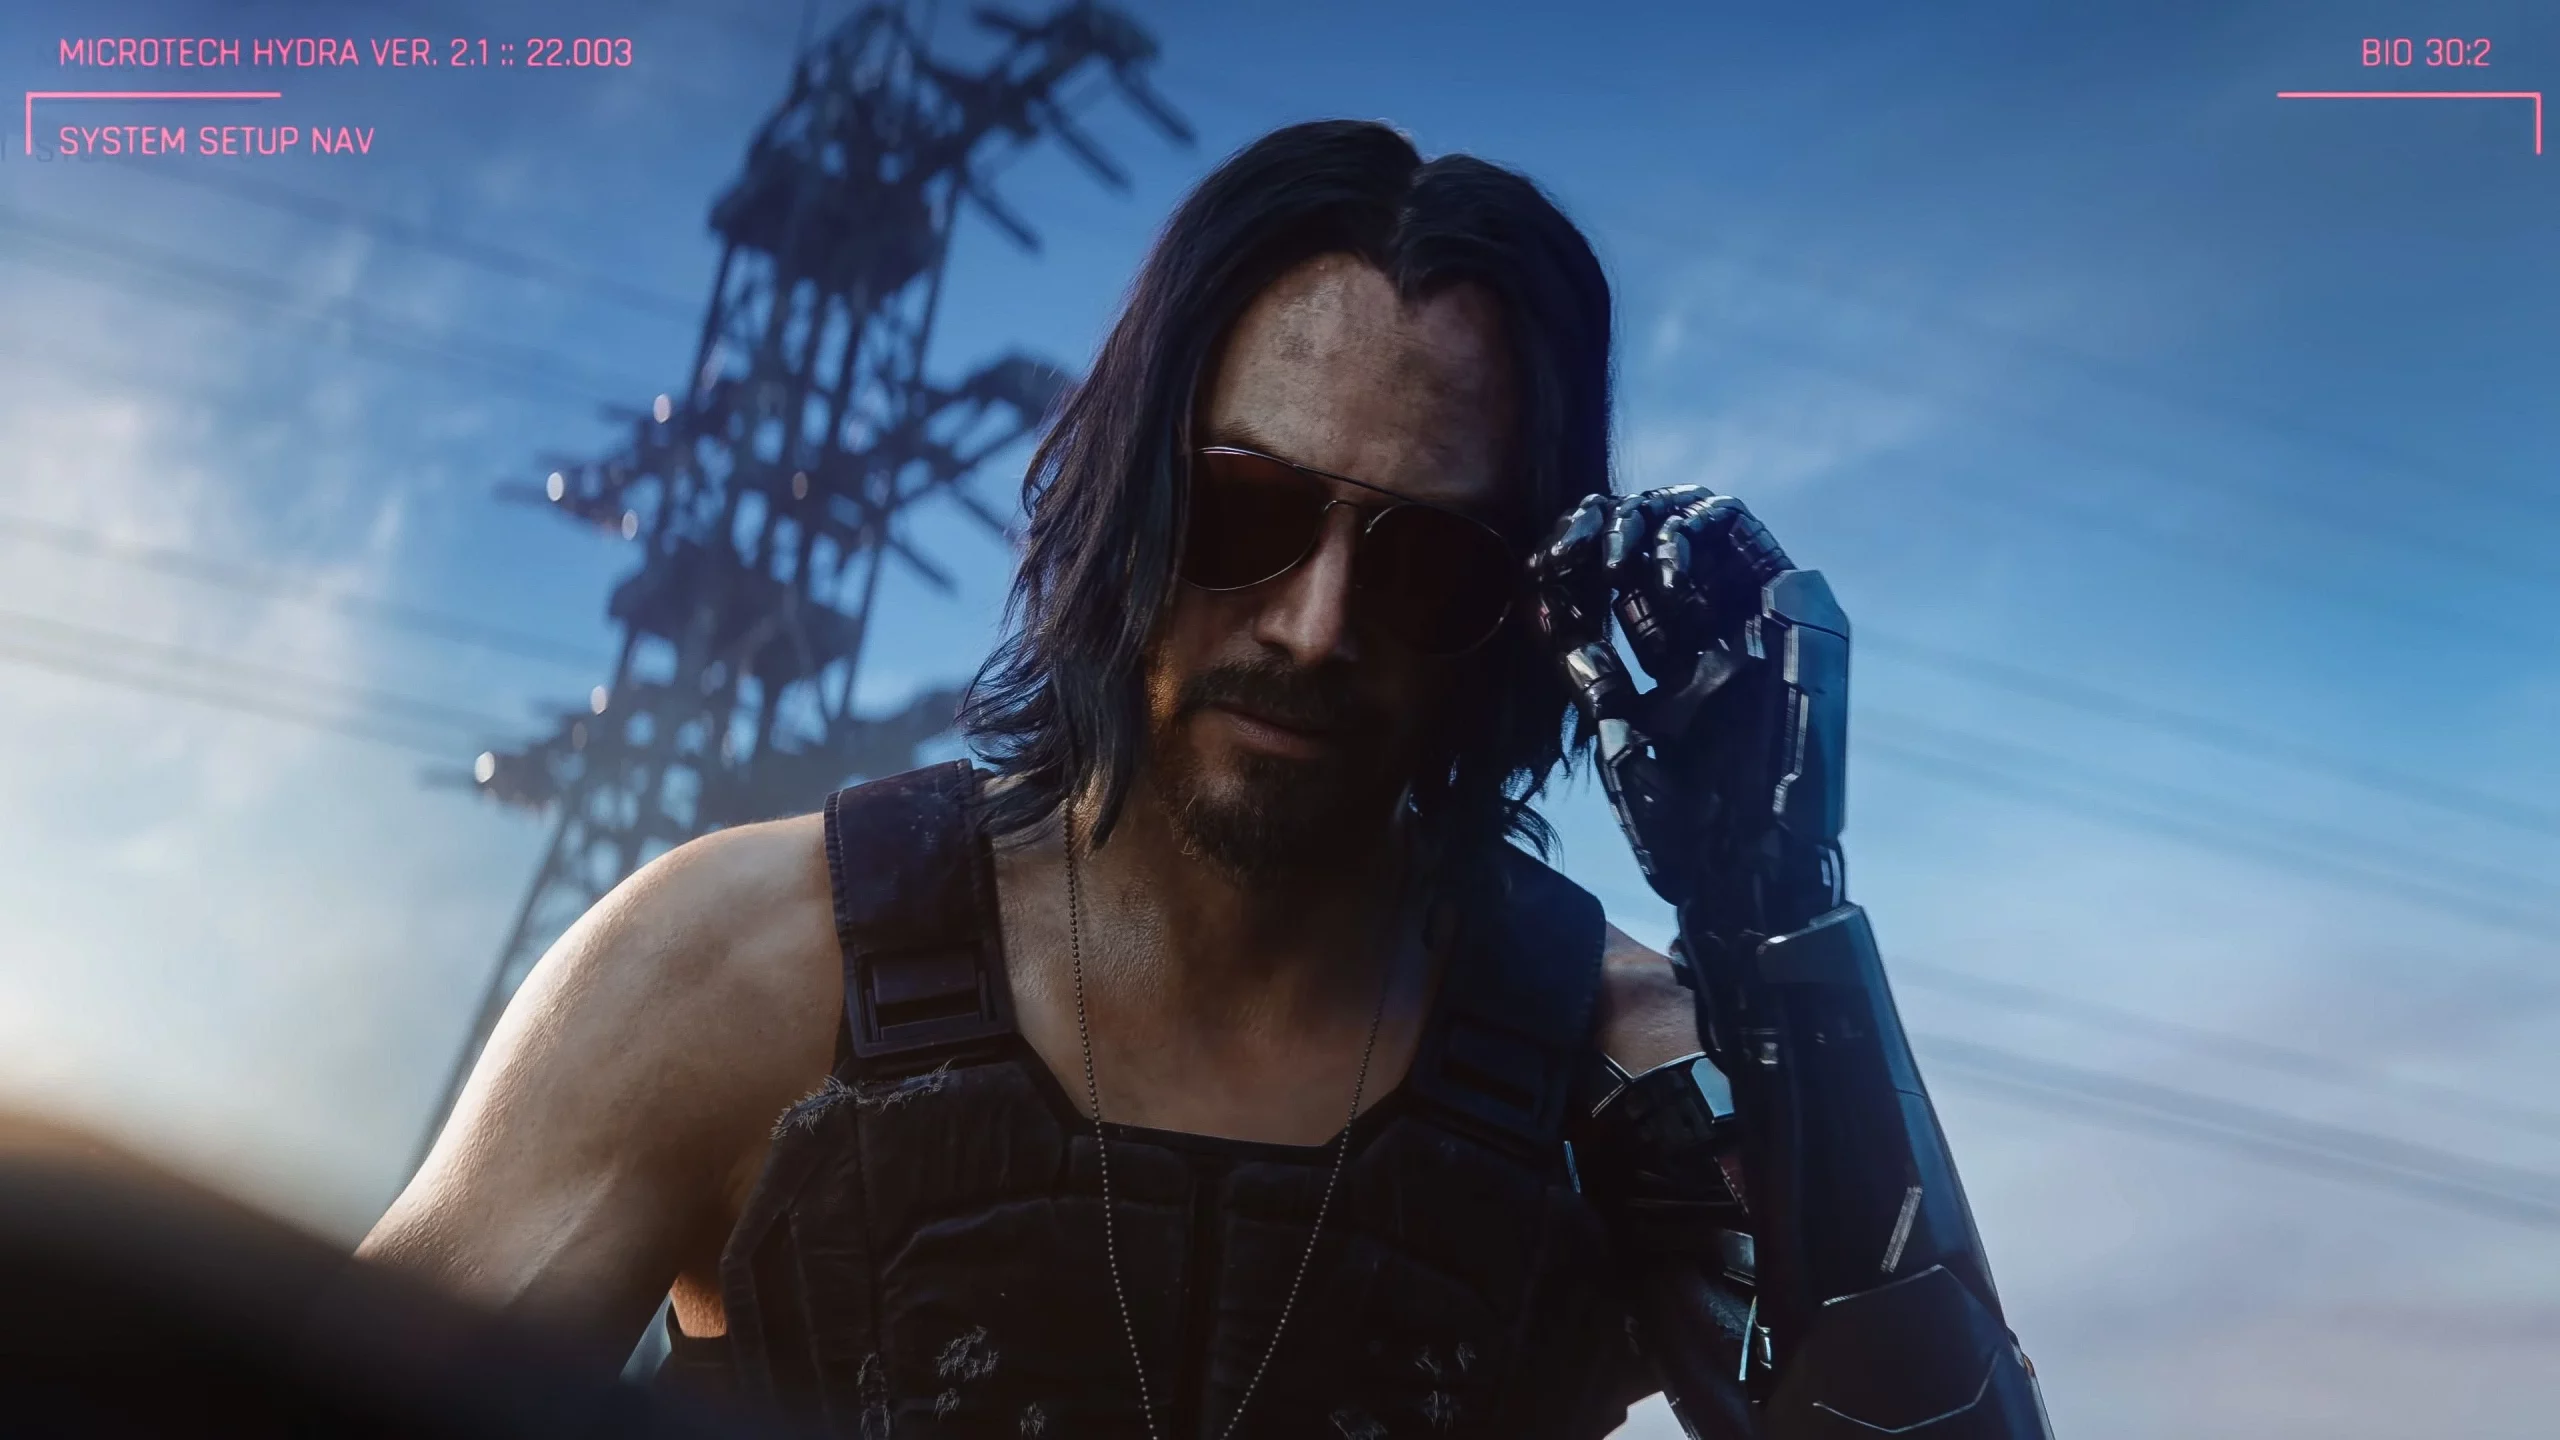 Keanu Reeves character acts as a guiding figure in Cyberpunk 2077.